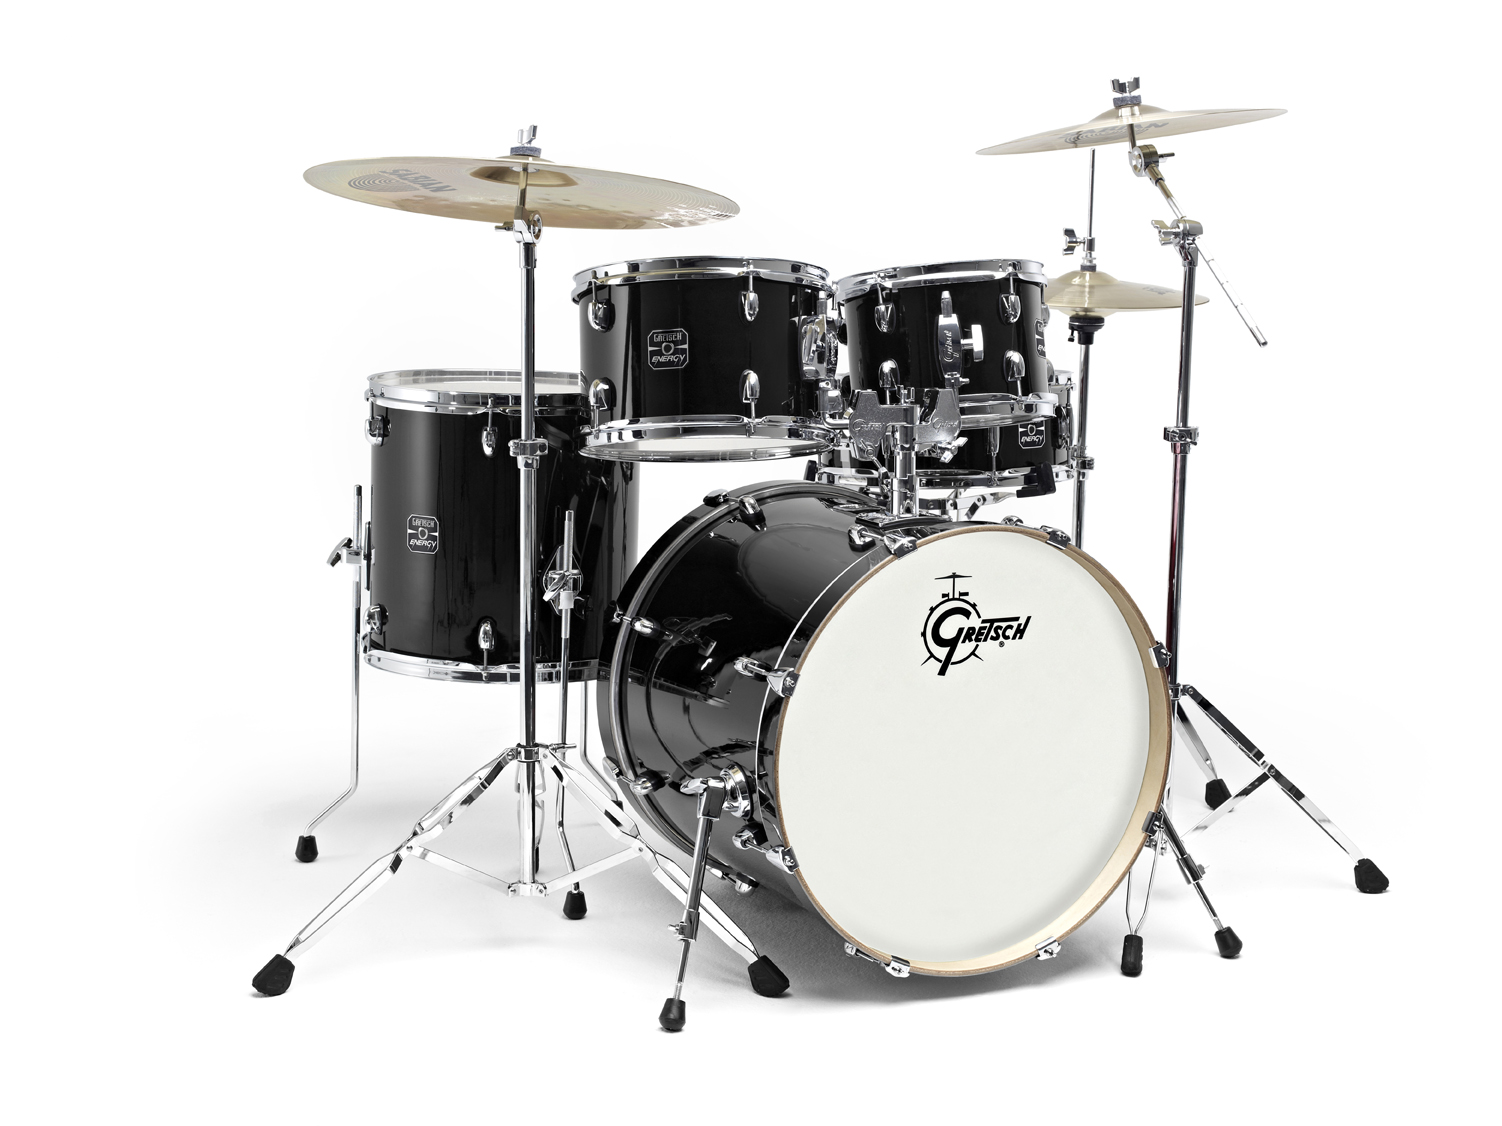 GRETSCH DRUMS NEW ENERGY FUSION 20